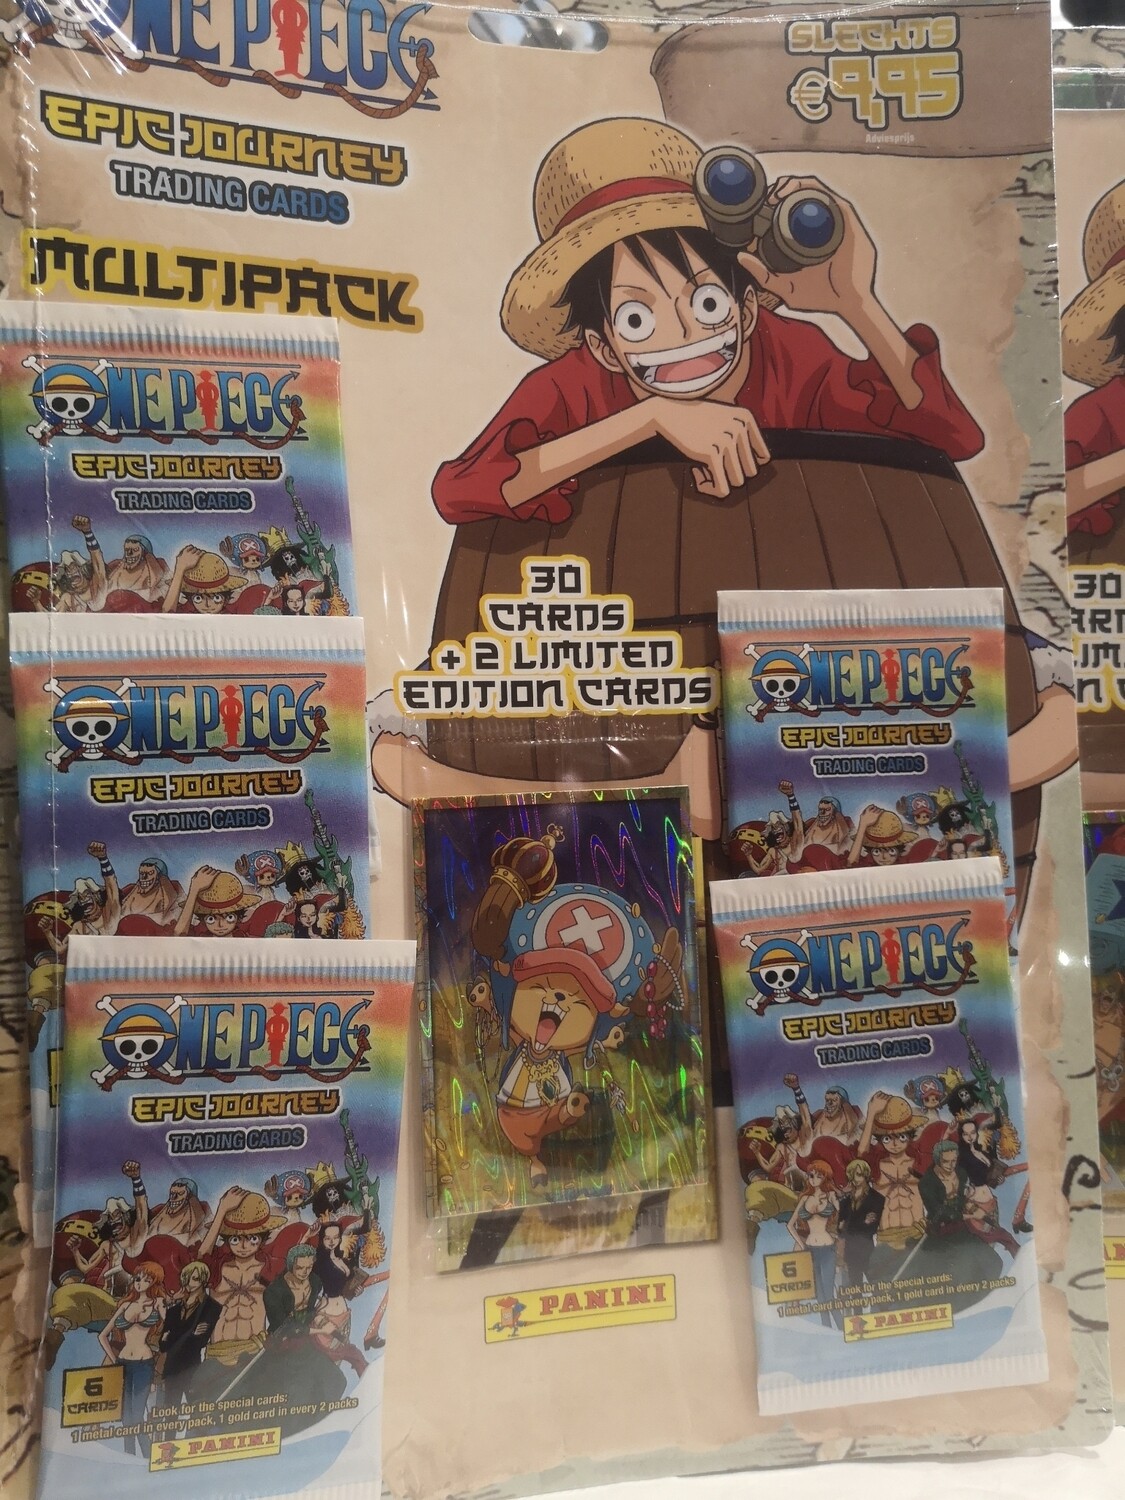 Multipack, One Piece Epic Journey, Trading Cards